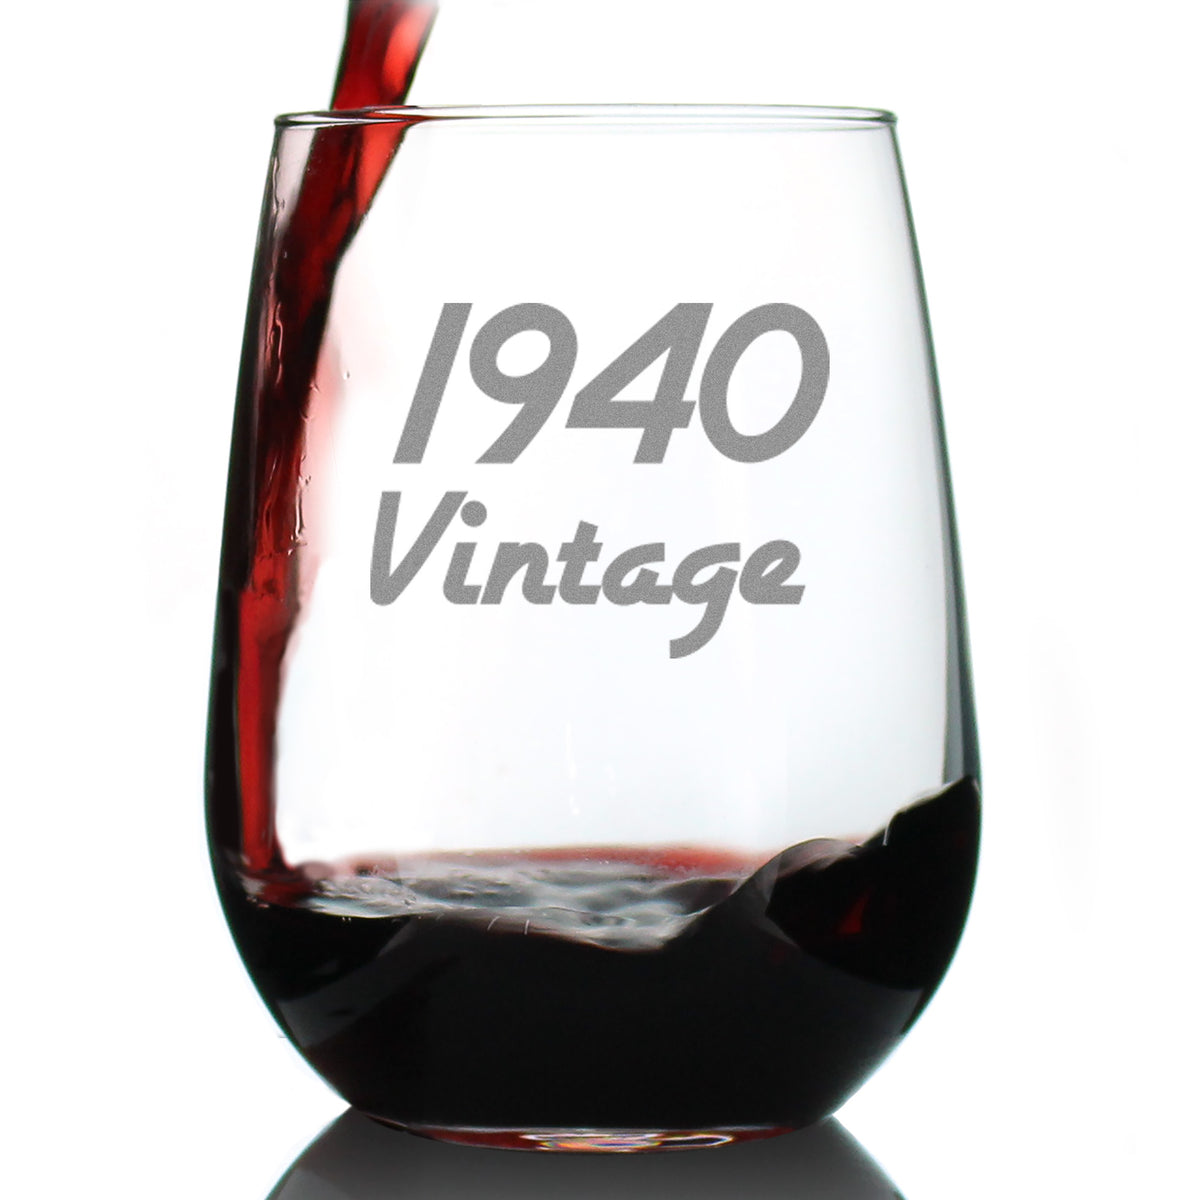 Vintage 1940-83rd Birthday Stemless Wine Glass Gifts for Women &amp; Men Turning 83 - Bday Party Decor - Large Glasses